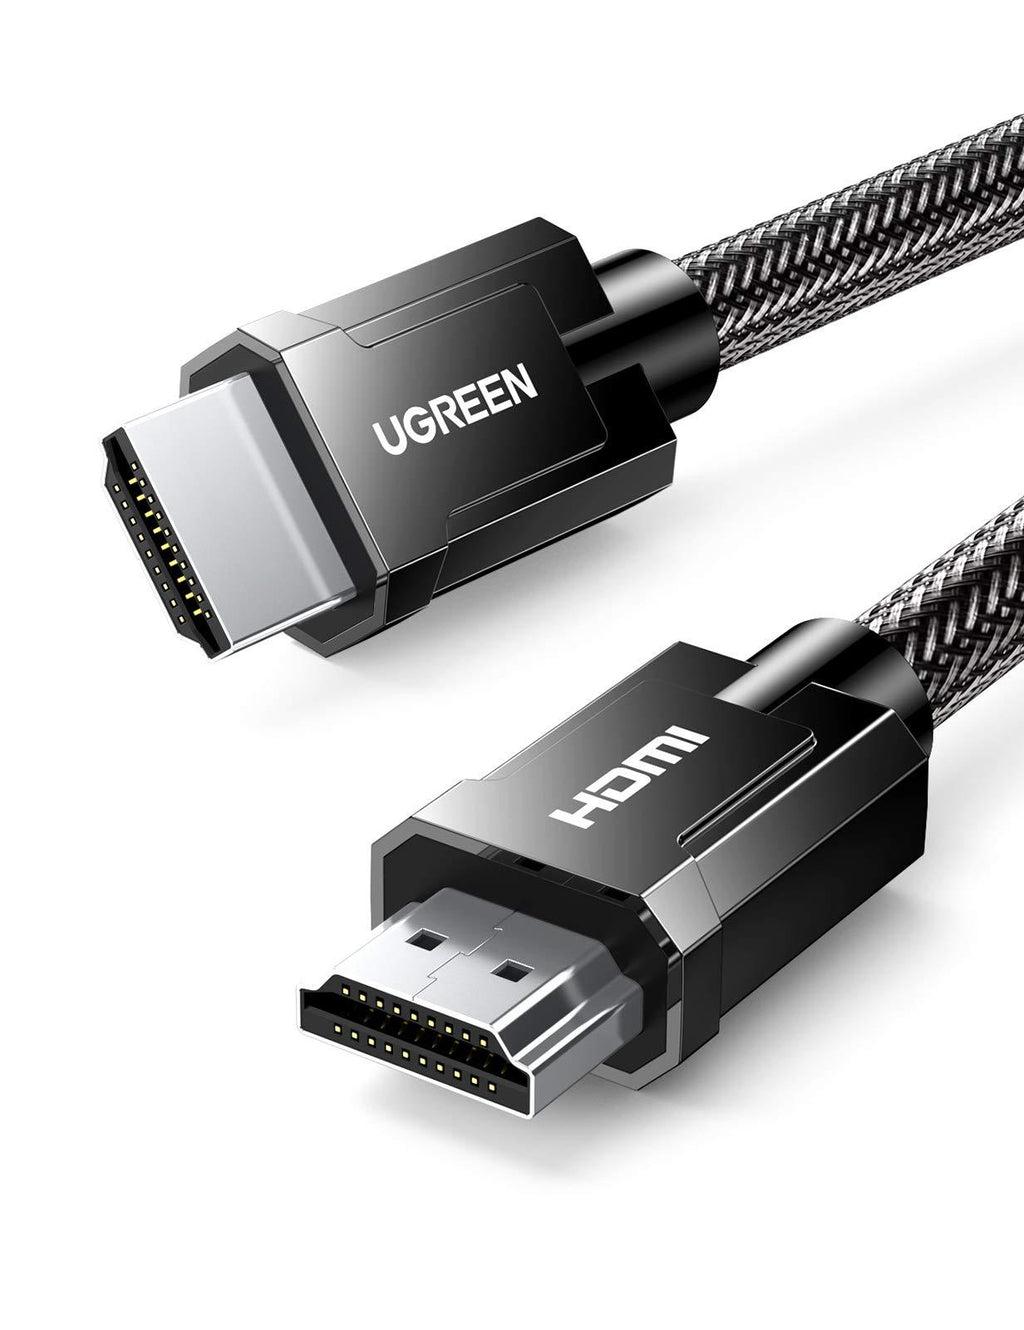 UGREEN 8K 48Gbps HDMI Cable Ultra High Speed HDMI 2.1 Support 8K 60Hz Dynamic HDR Dolby Vision eARC Compatible for Xbox One Nintendo Switch Samsung TV Roku PS5 Nylon Braided 6 Feet 2.0 Meters